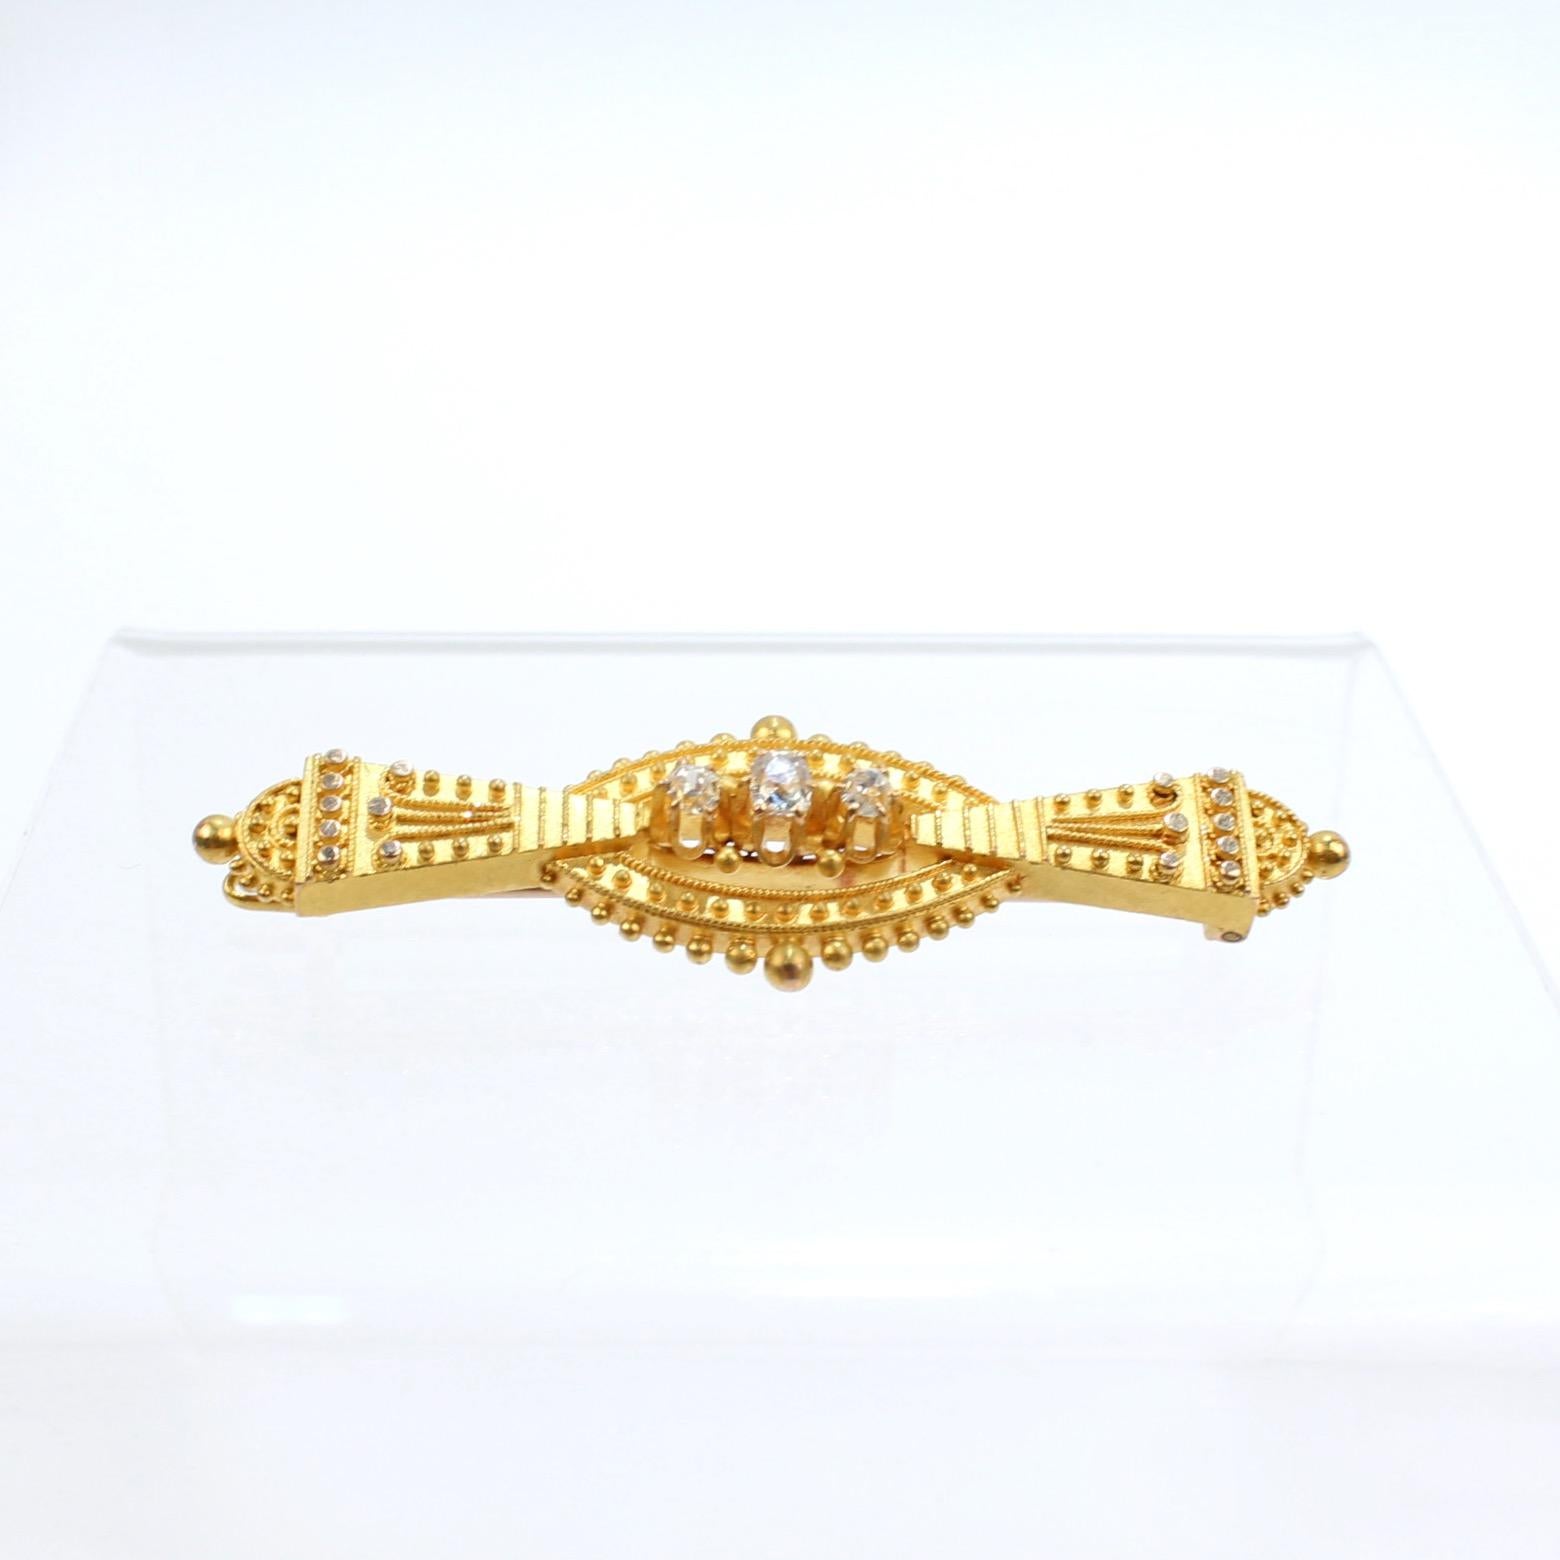 Round Cut Antique Victorian Etruscan Revival 14 Karat Gold and Diamond Brooch or Pin For Sale